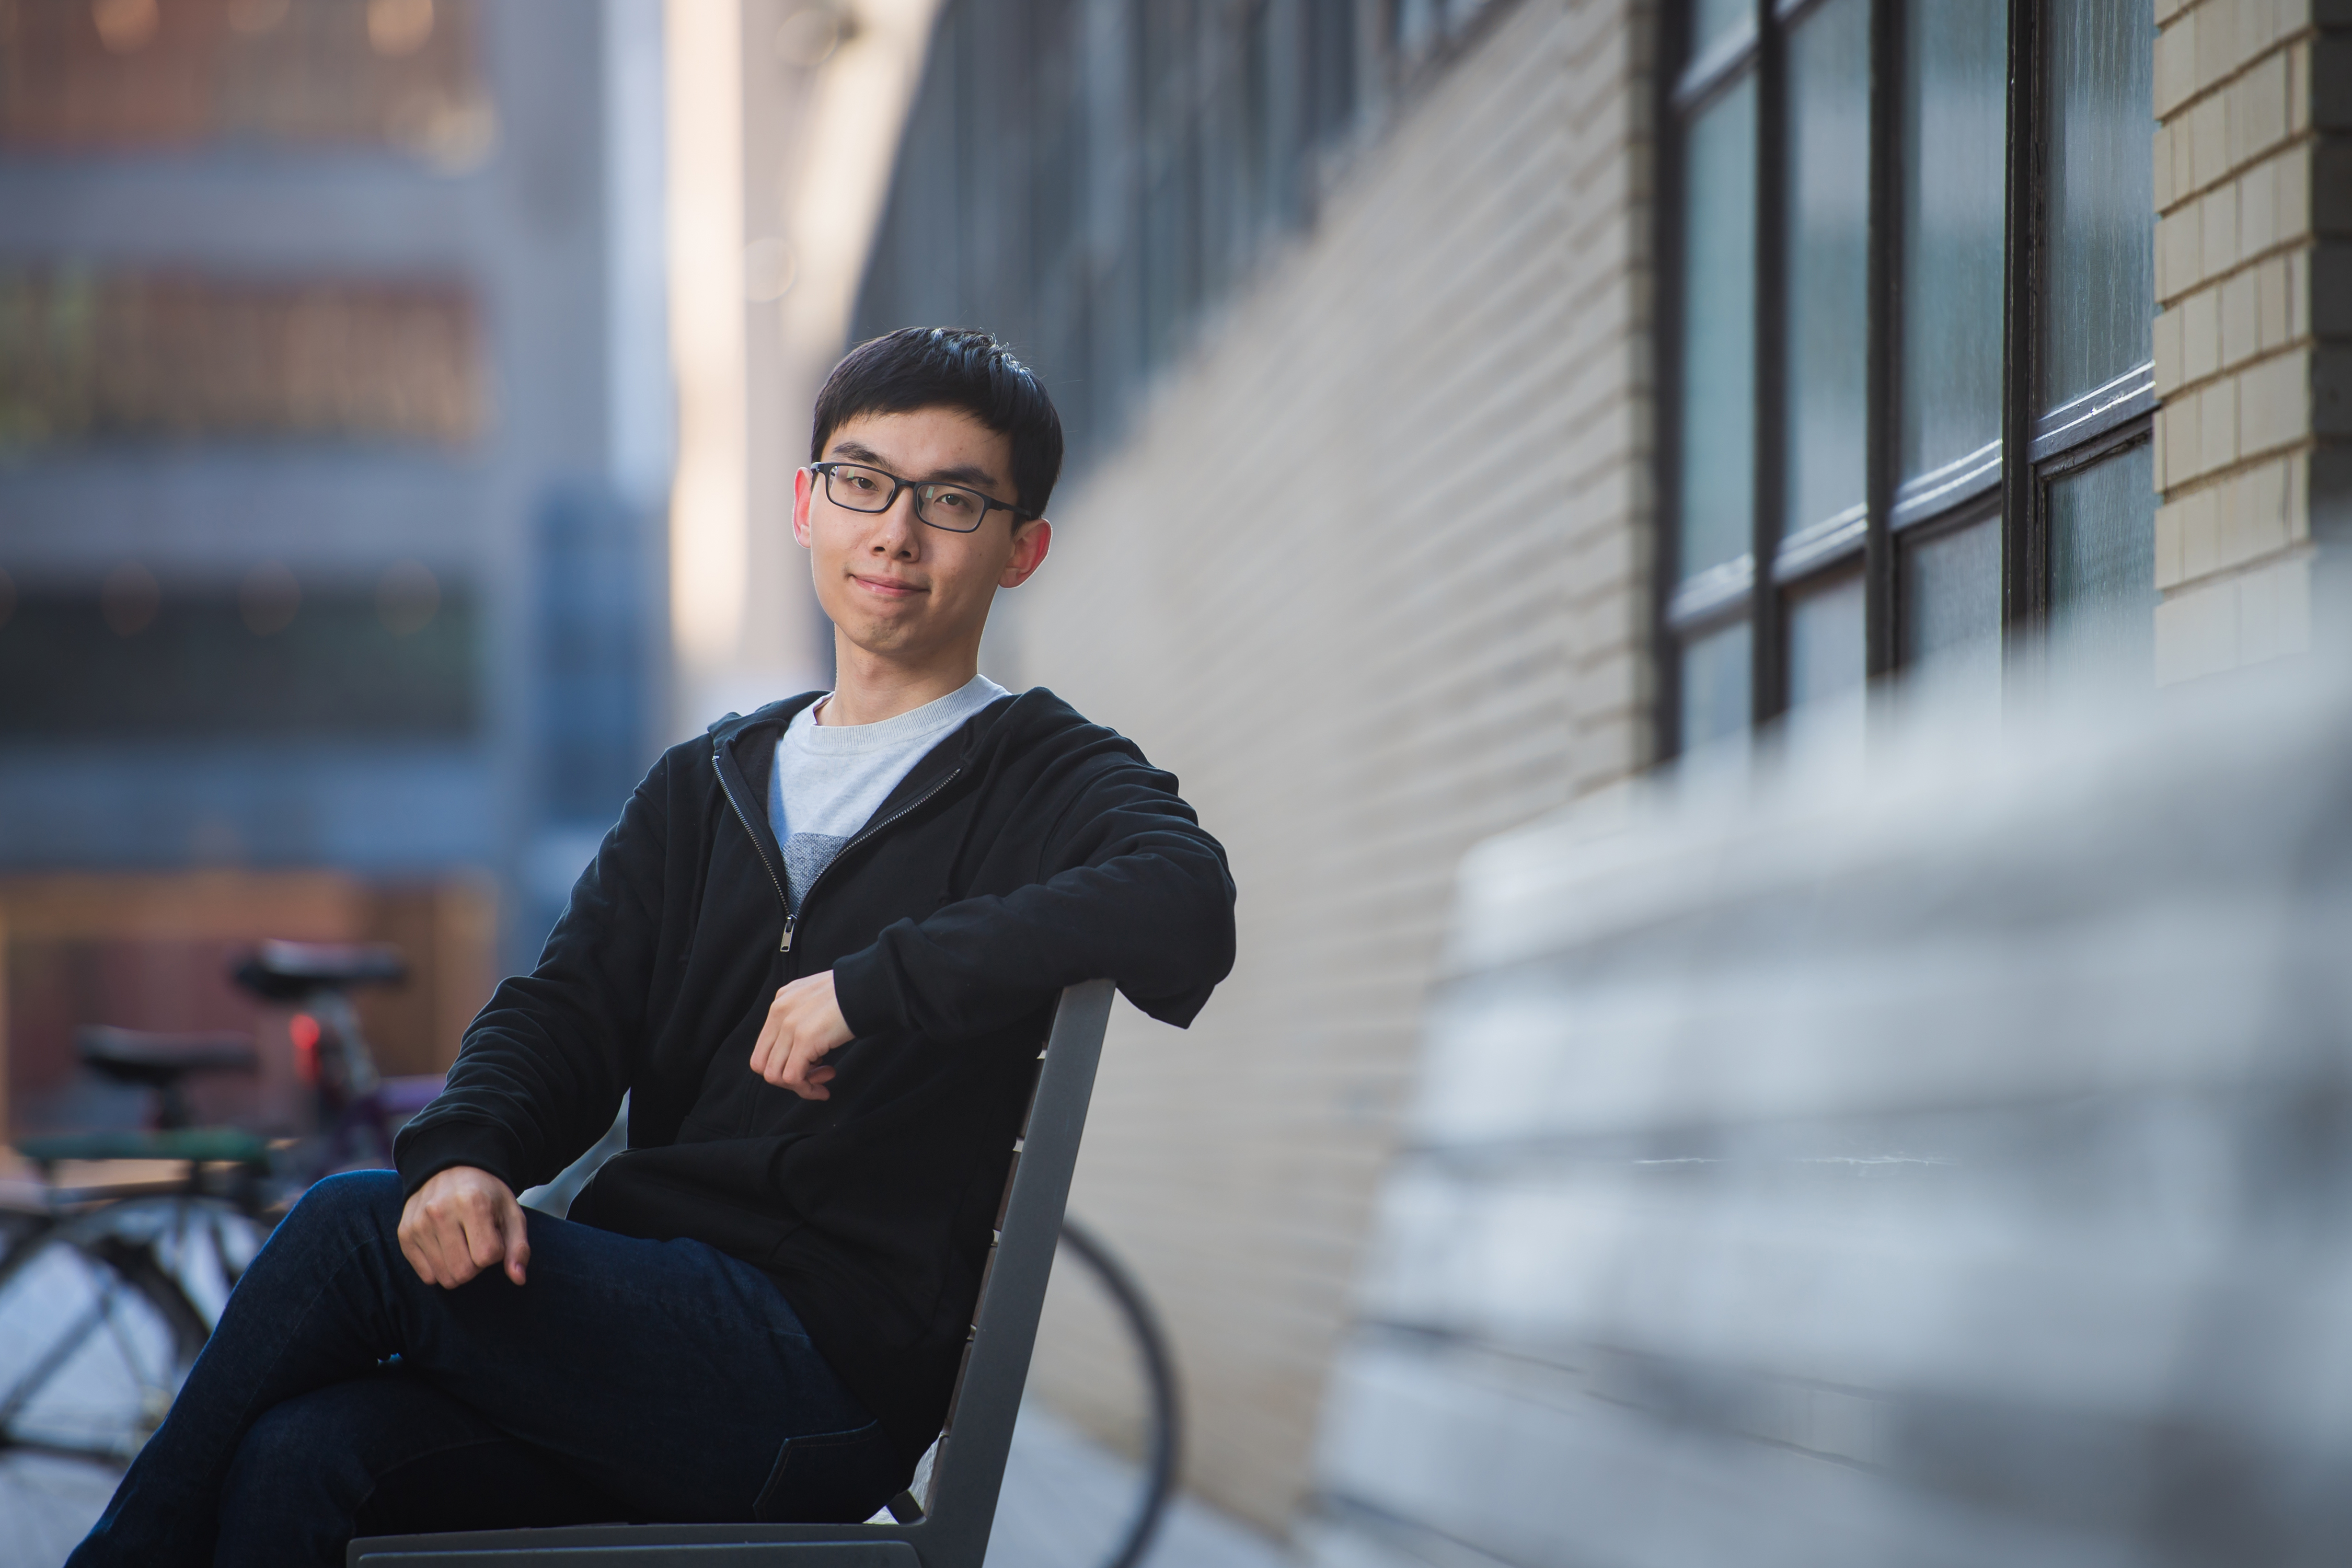 “I’m focusing on the tiniest of things and there’s something really wonderful there,” says Changhao Li. “It’s about nature too, right? If you learn about how this tiny thing works, you can maybe also learn how the bigger things work.”